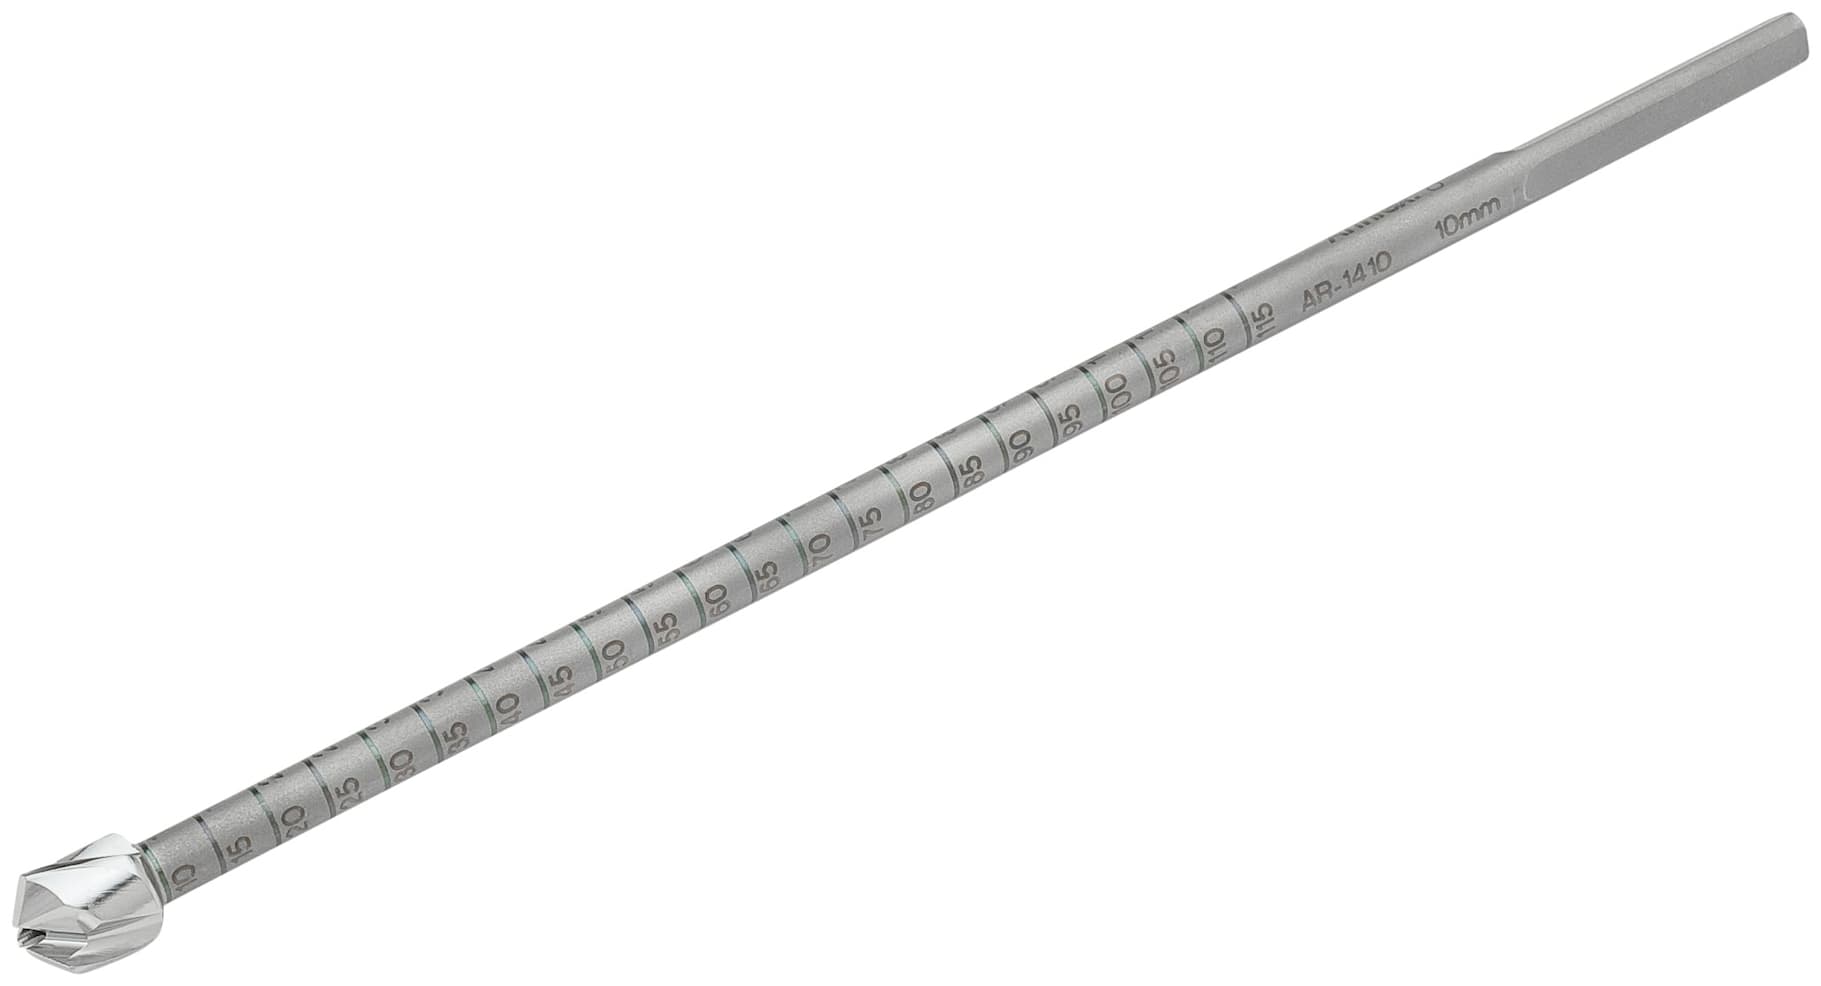 Cannulated Headed Reamer, 10 mm